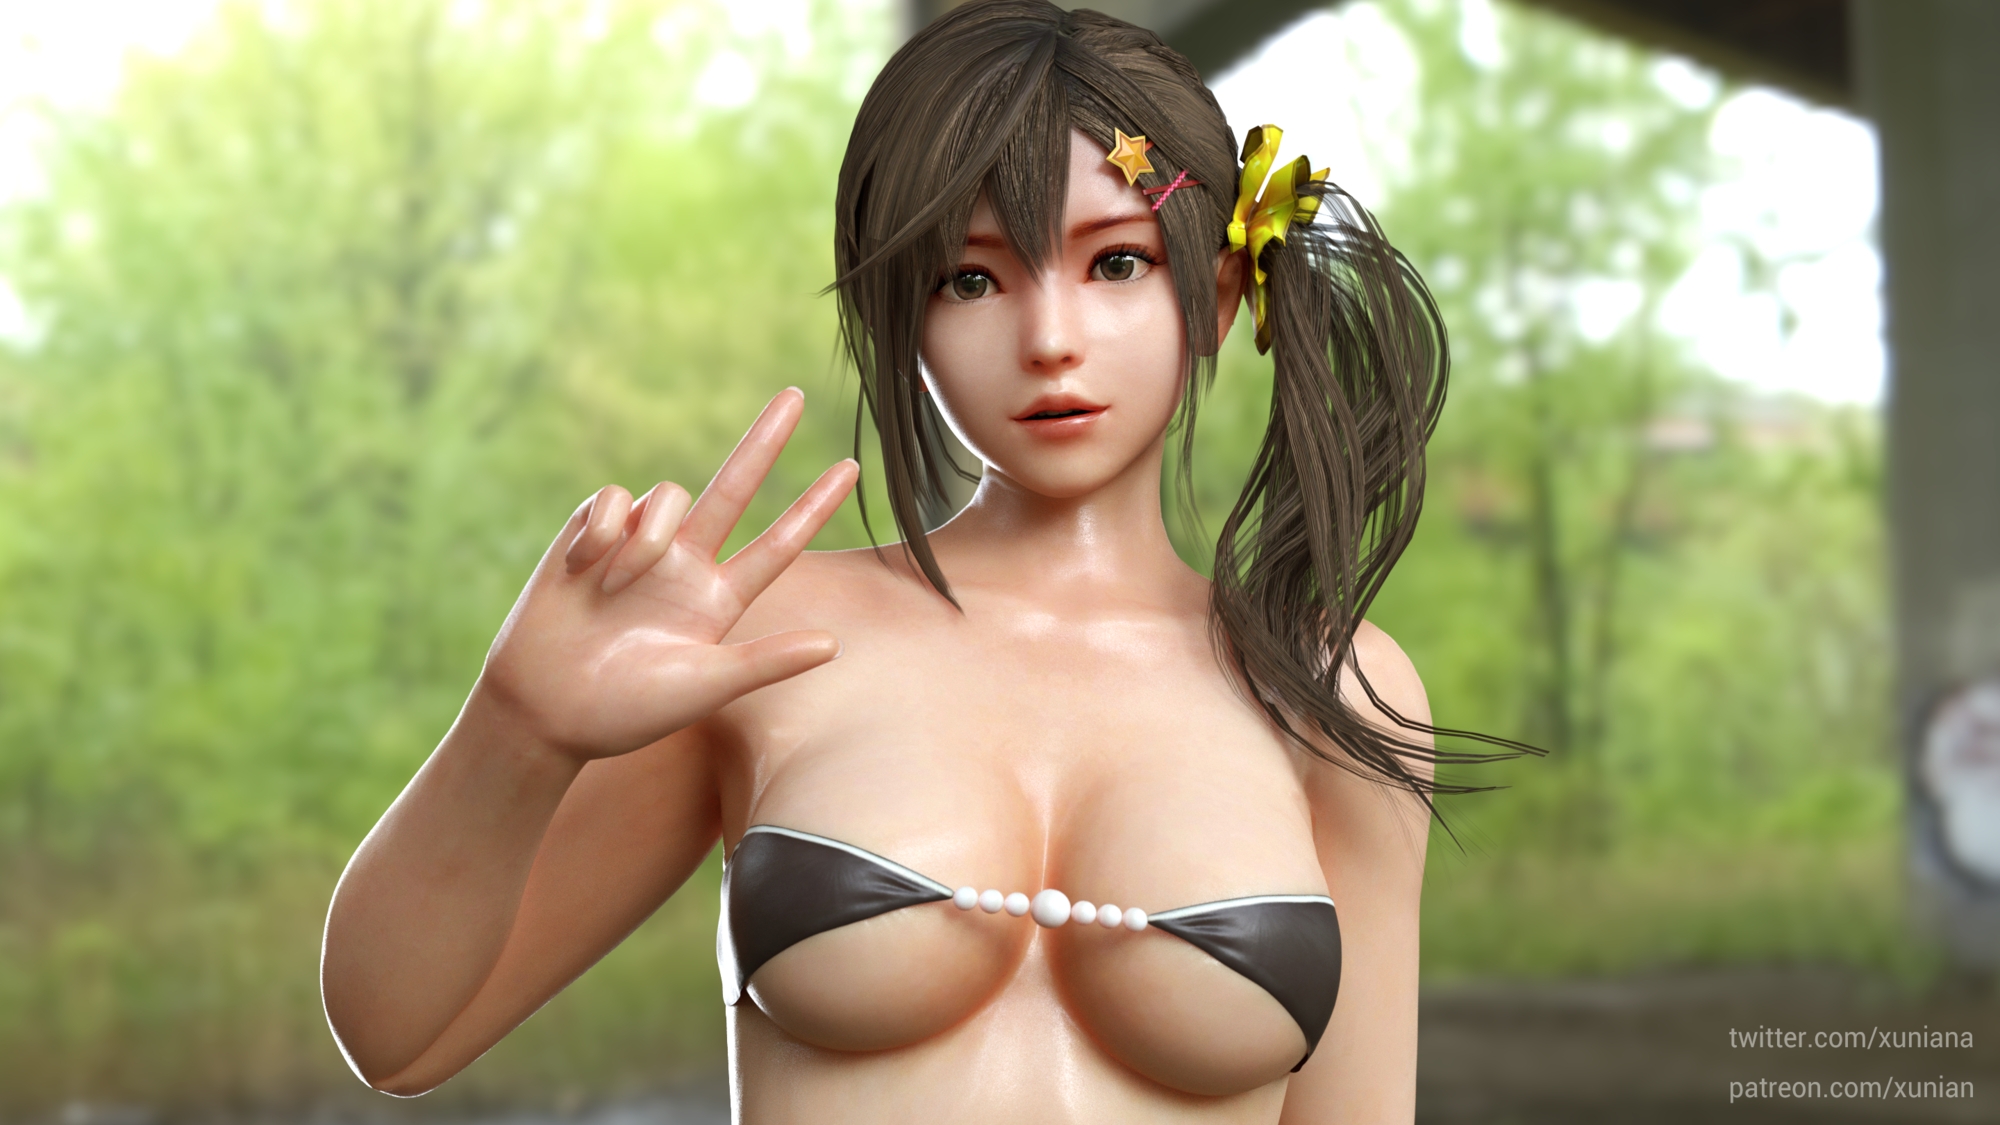 Misaki V Dead Or Alive Misaki 3d Porn 3d Girl 3dnsfw Sexy Posing Looking At Viewer Natural Tits